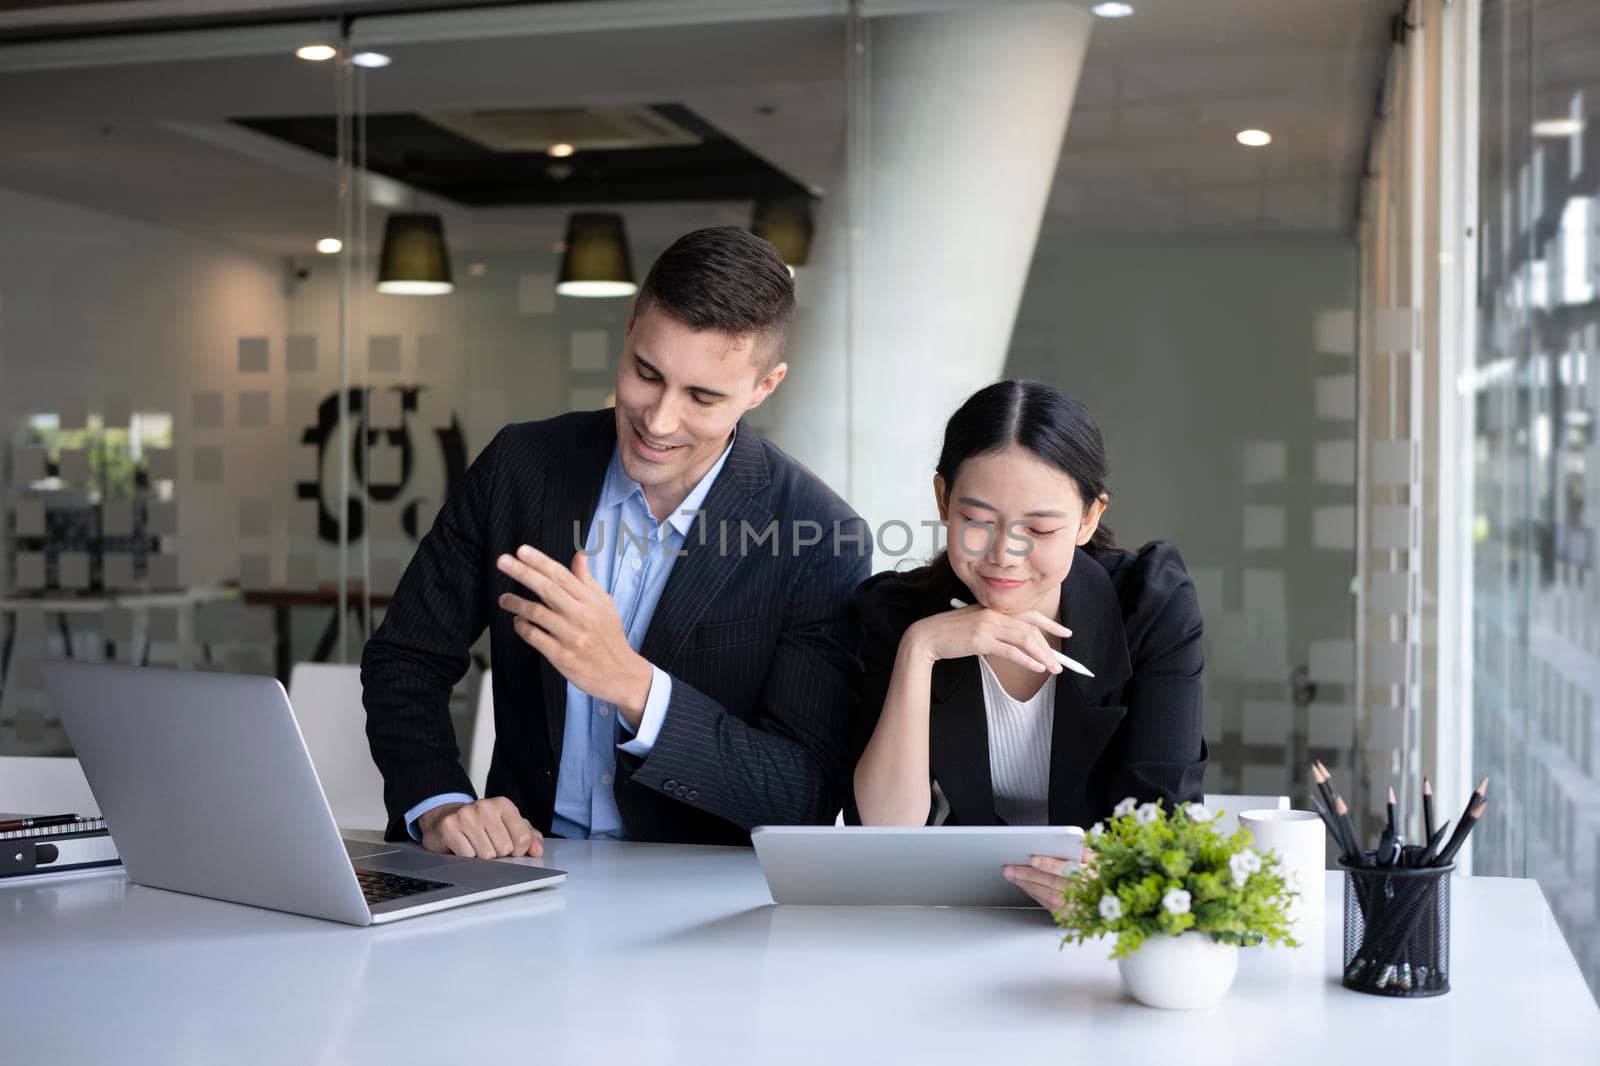 Two smiling business colleagues sitting in modern workplace and working together.